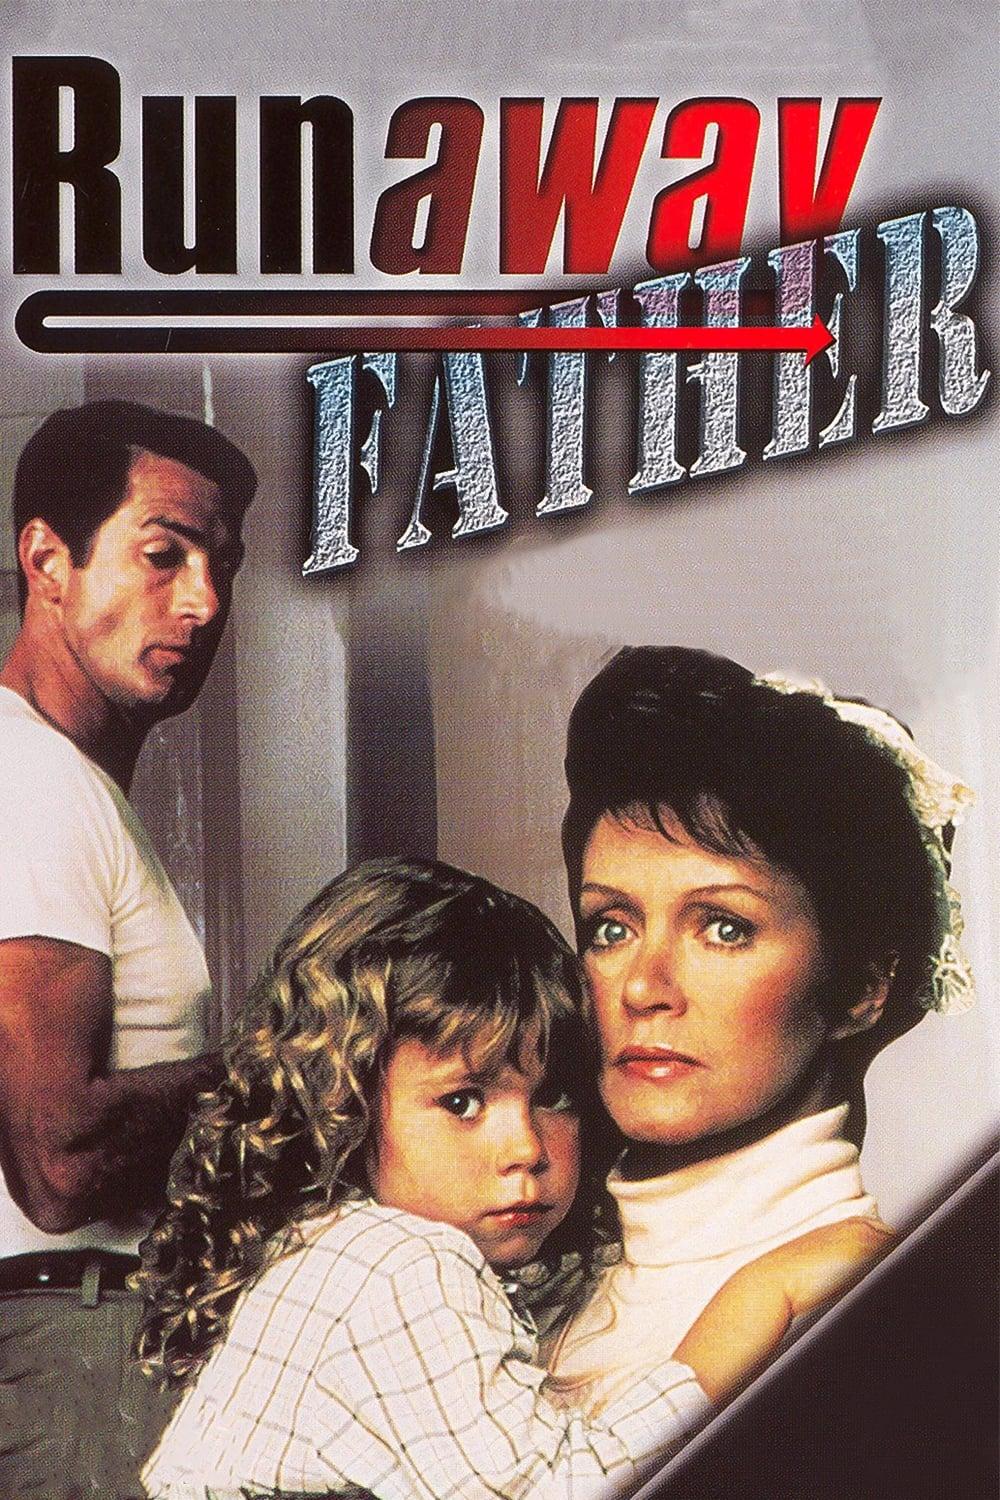 Runaway Father poster